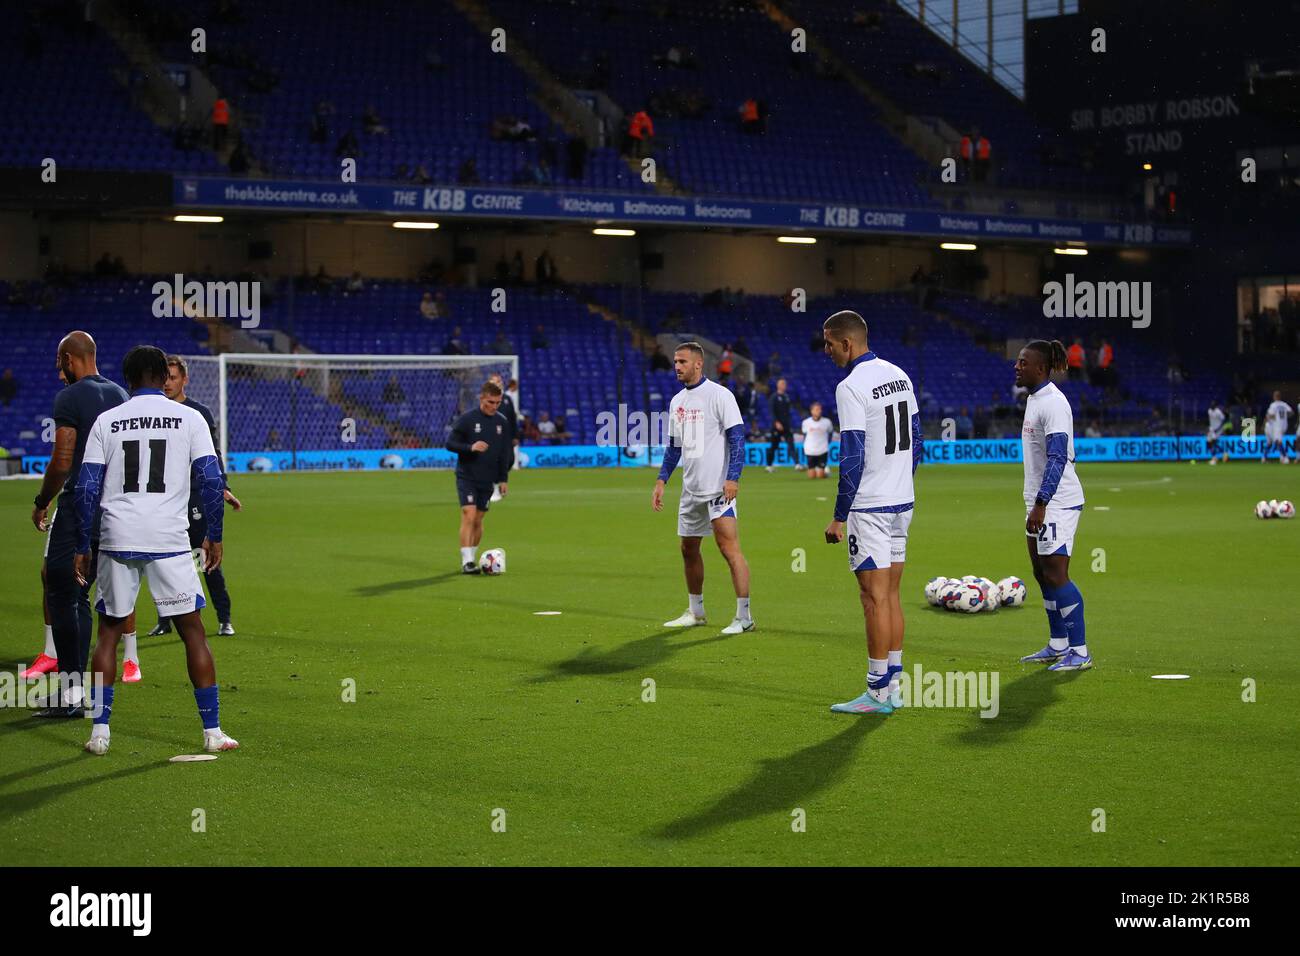 Ipswich Town players warm up wearing t-shirts in support of former player Marcus Stewart who recently diagnosed with Motor Neurone Disease (MND)- Ipswich Town v Bristol Rovers, Sky Bet League One, Portman Road, Ipswich, UK - 13th September 2022  Editorial Use Only - DataCo restrictions apply Stock Photo